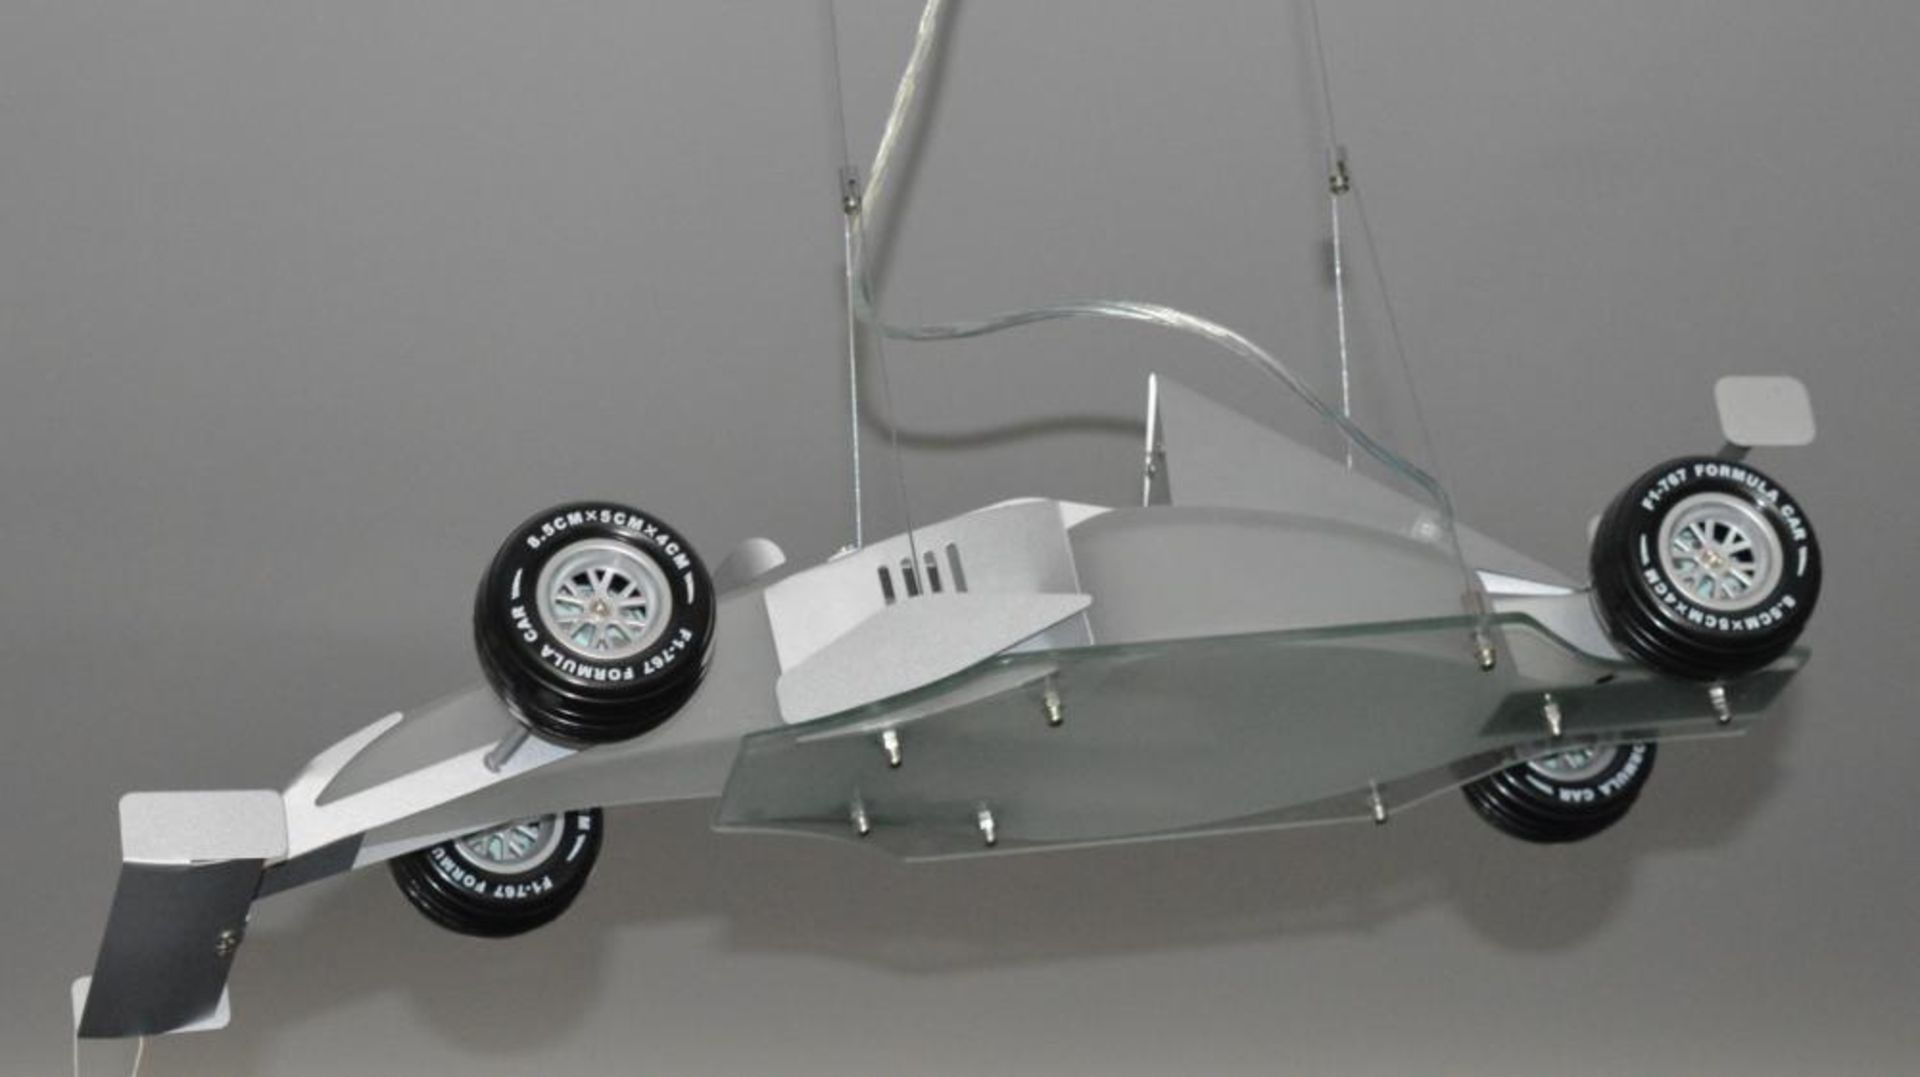 1 x Novelt Satin Silver Racing Car Ceiling Light With Frosted Glass - Ex Display Stock - CL298 - Ref - Image 3 of 3